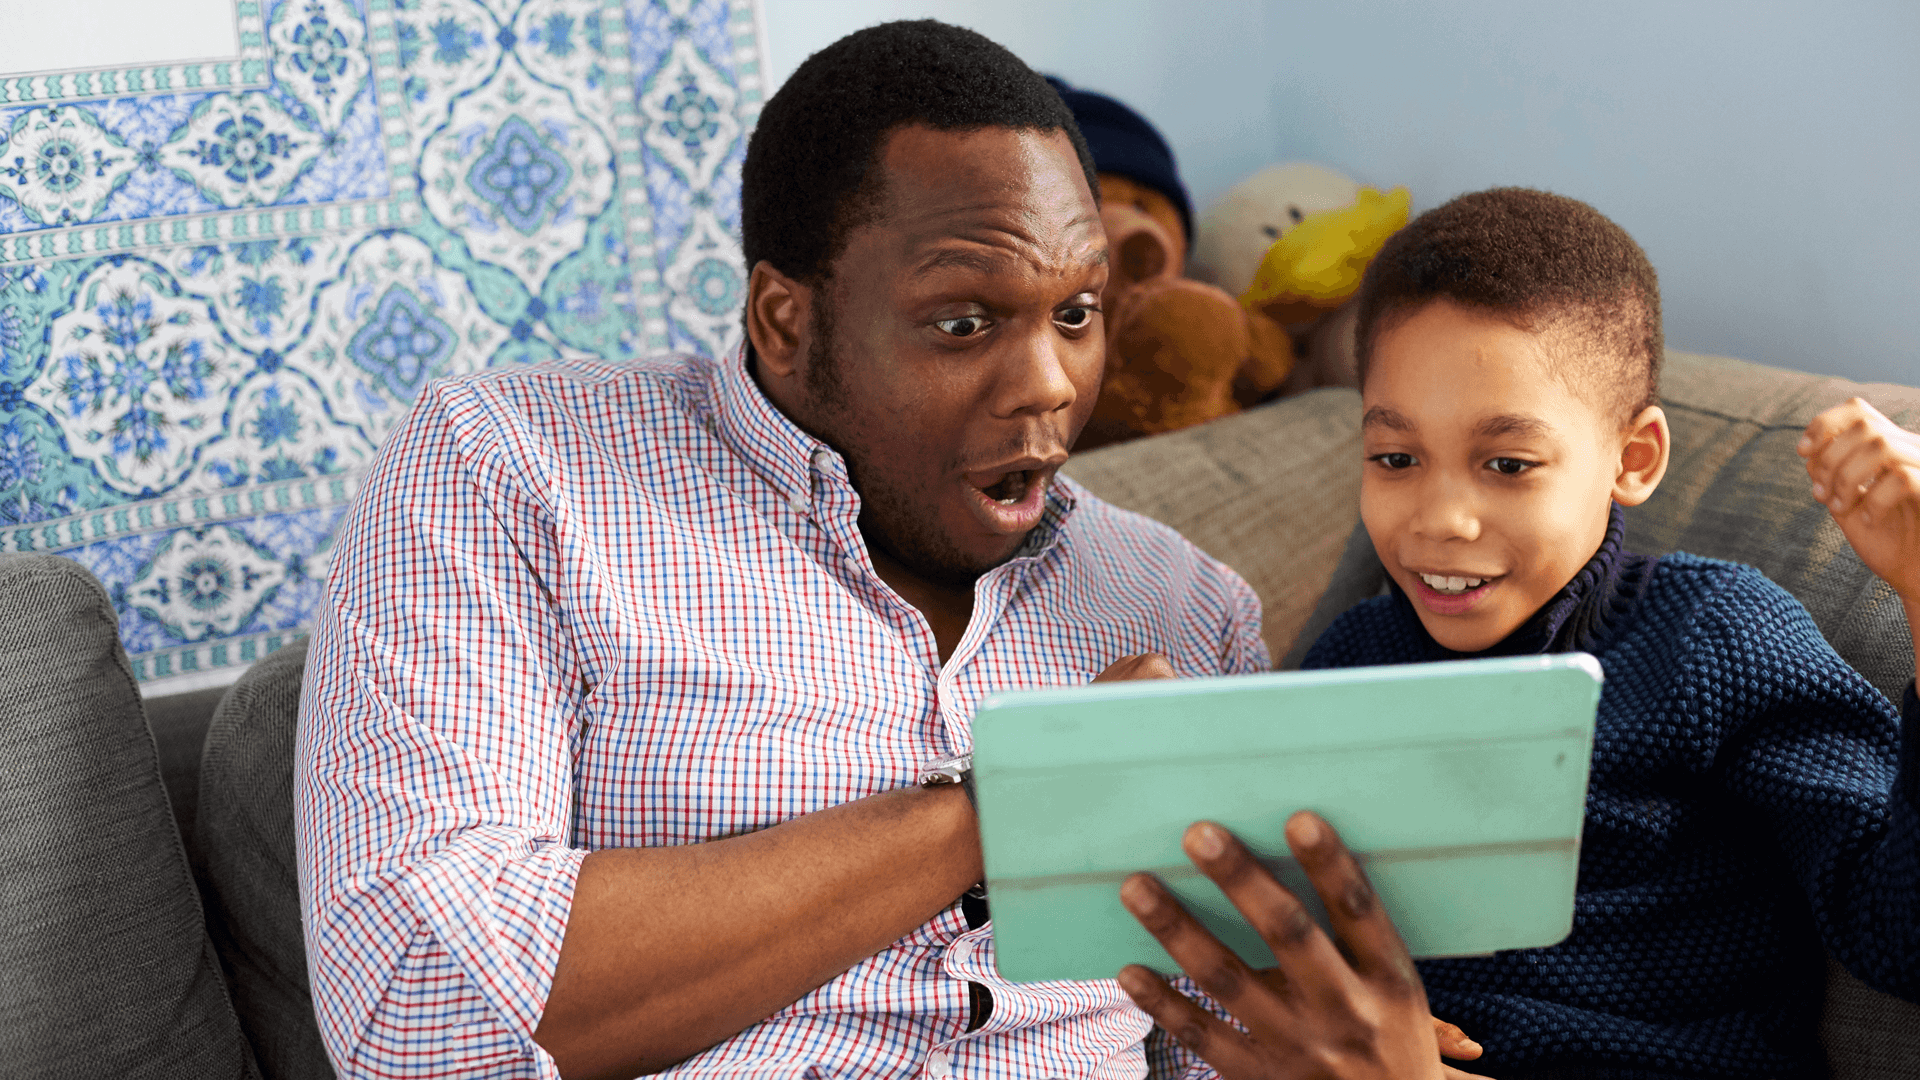 A father and son having lots of fun together on the sofa with a tablet